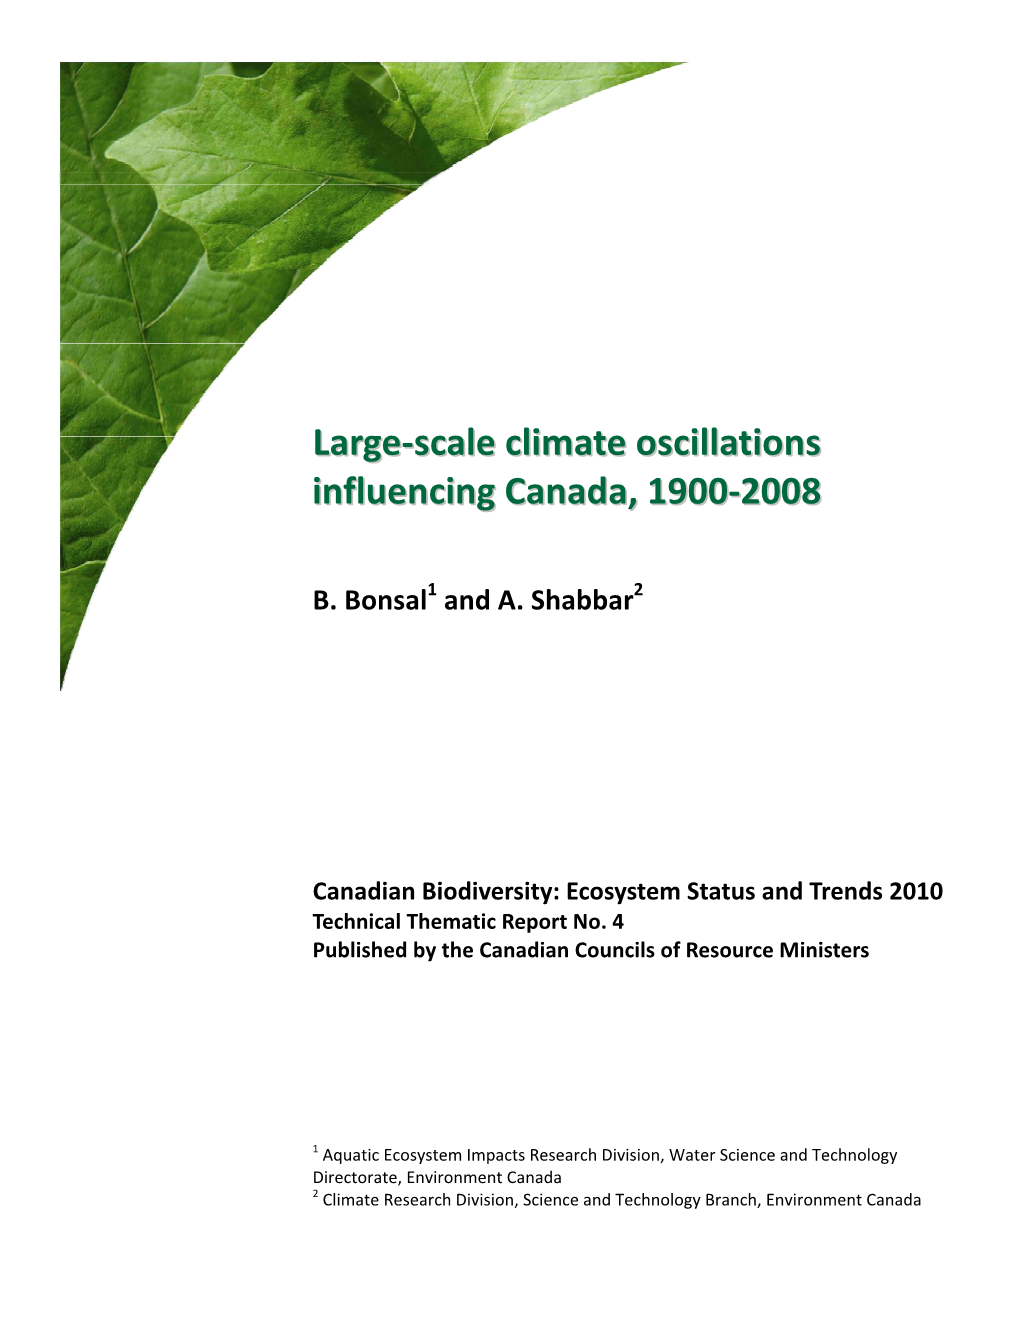 Large-Scale Climate Oscillations Influencing Canada, 1900-2008